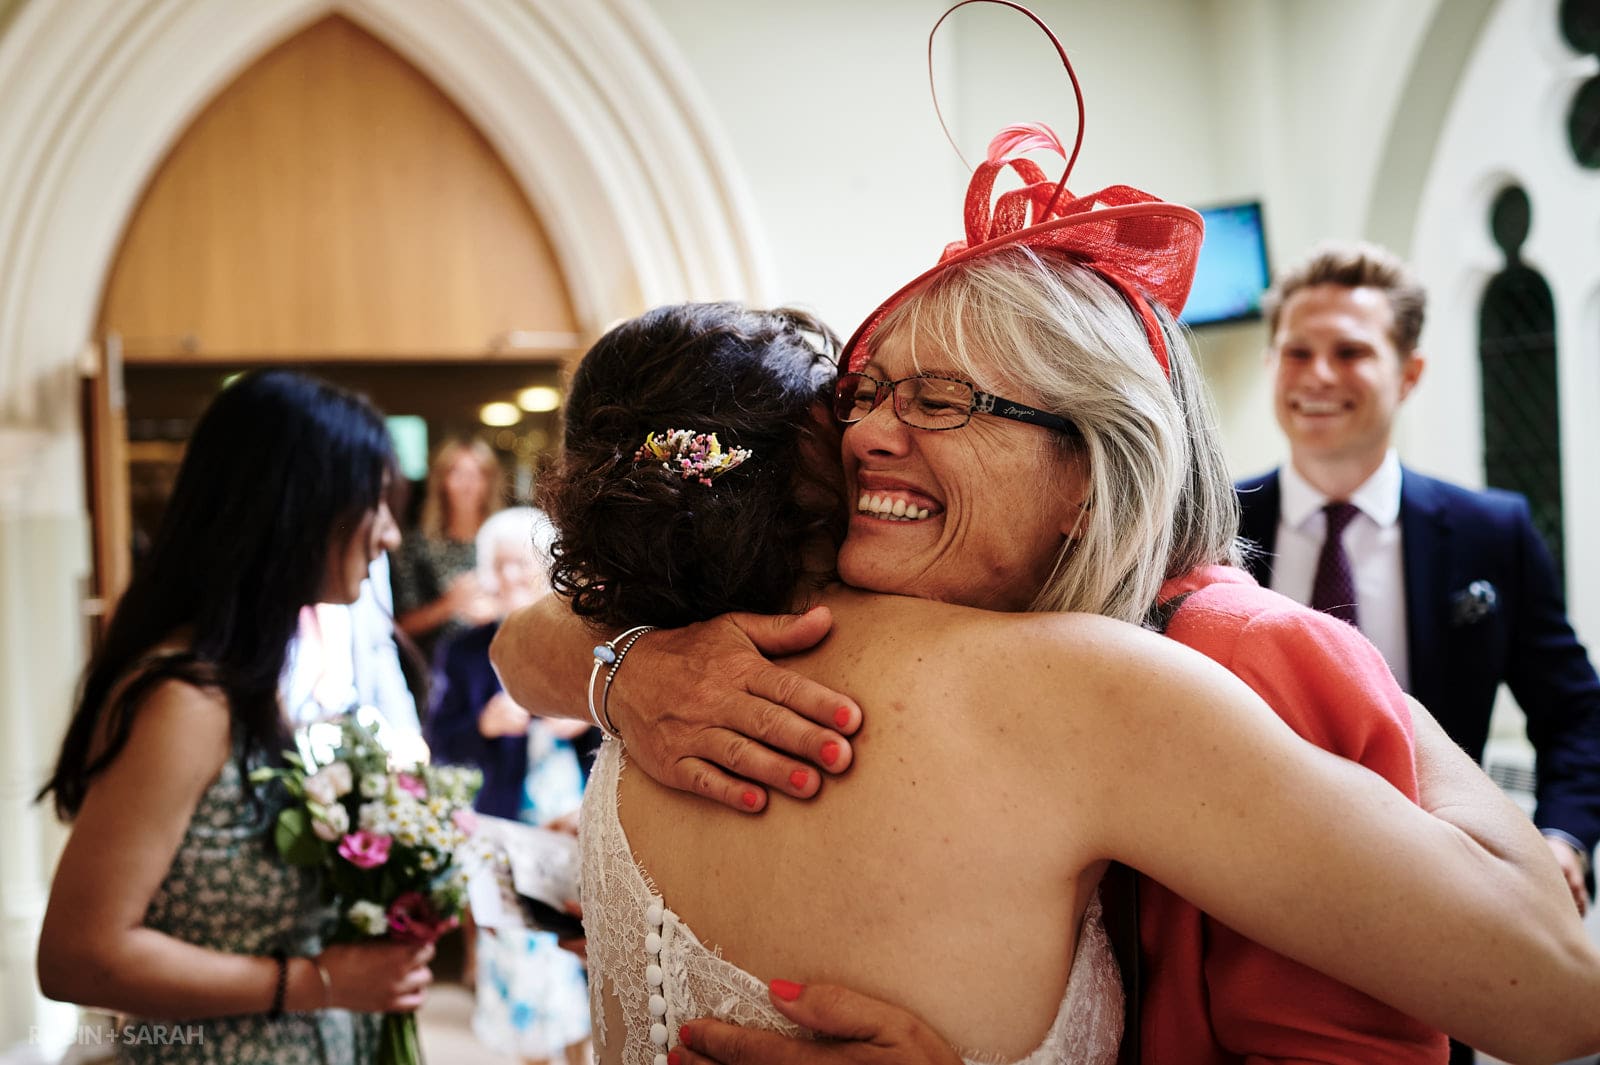 Guest hugs bride after wedding ceremony at St Pauls church in Leamington